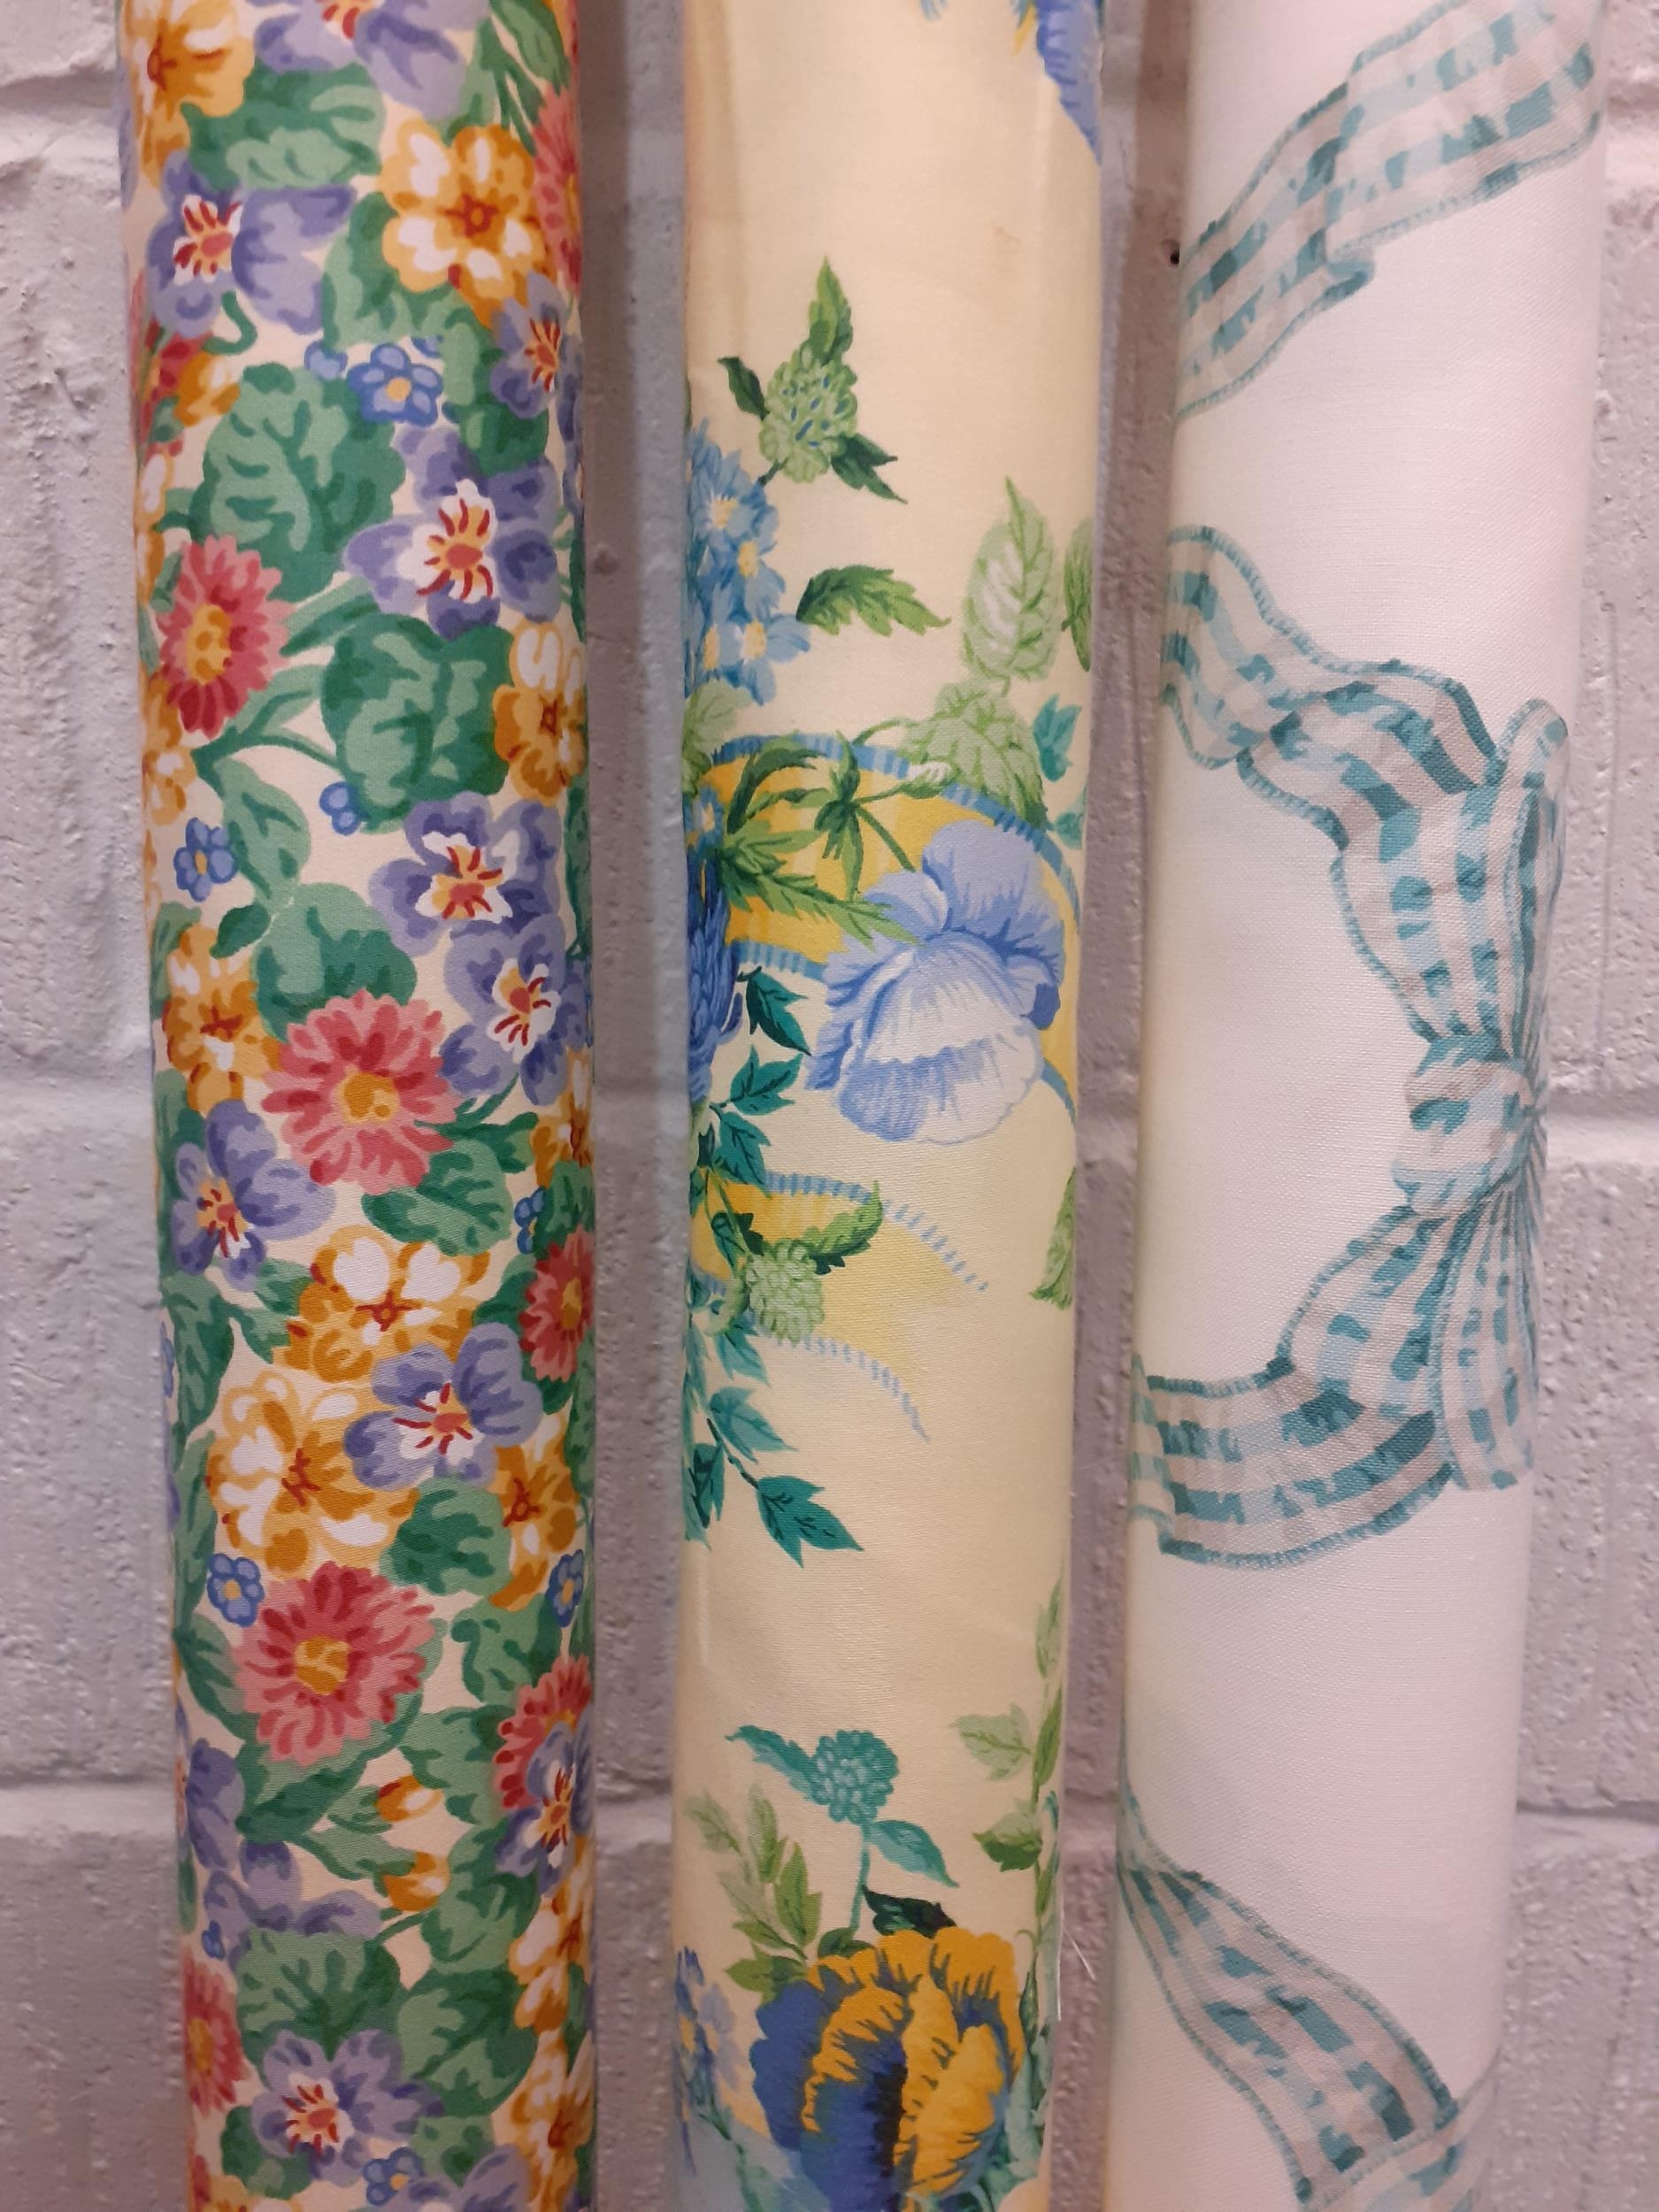 Three bolts of late 20th Century fabric to include 1994 Arthur Sanderson wildflower design, 1987